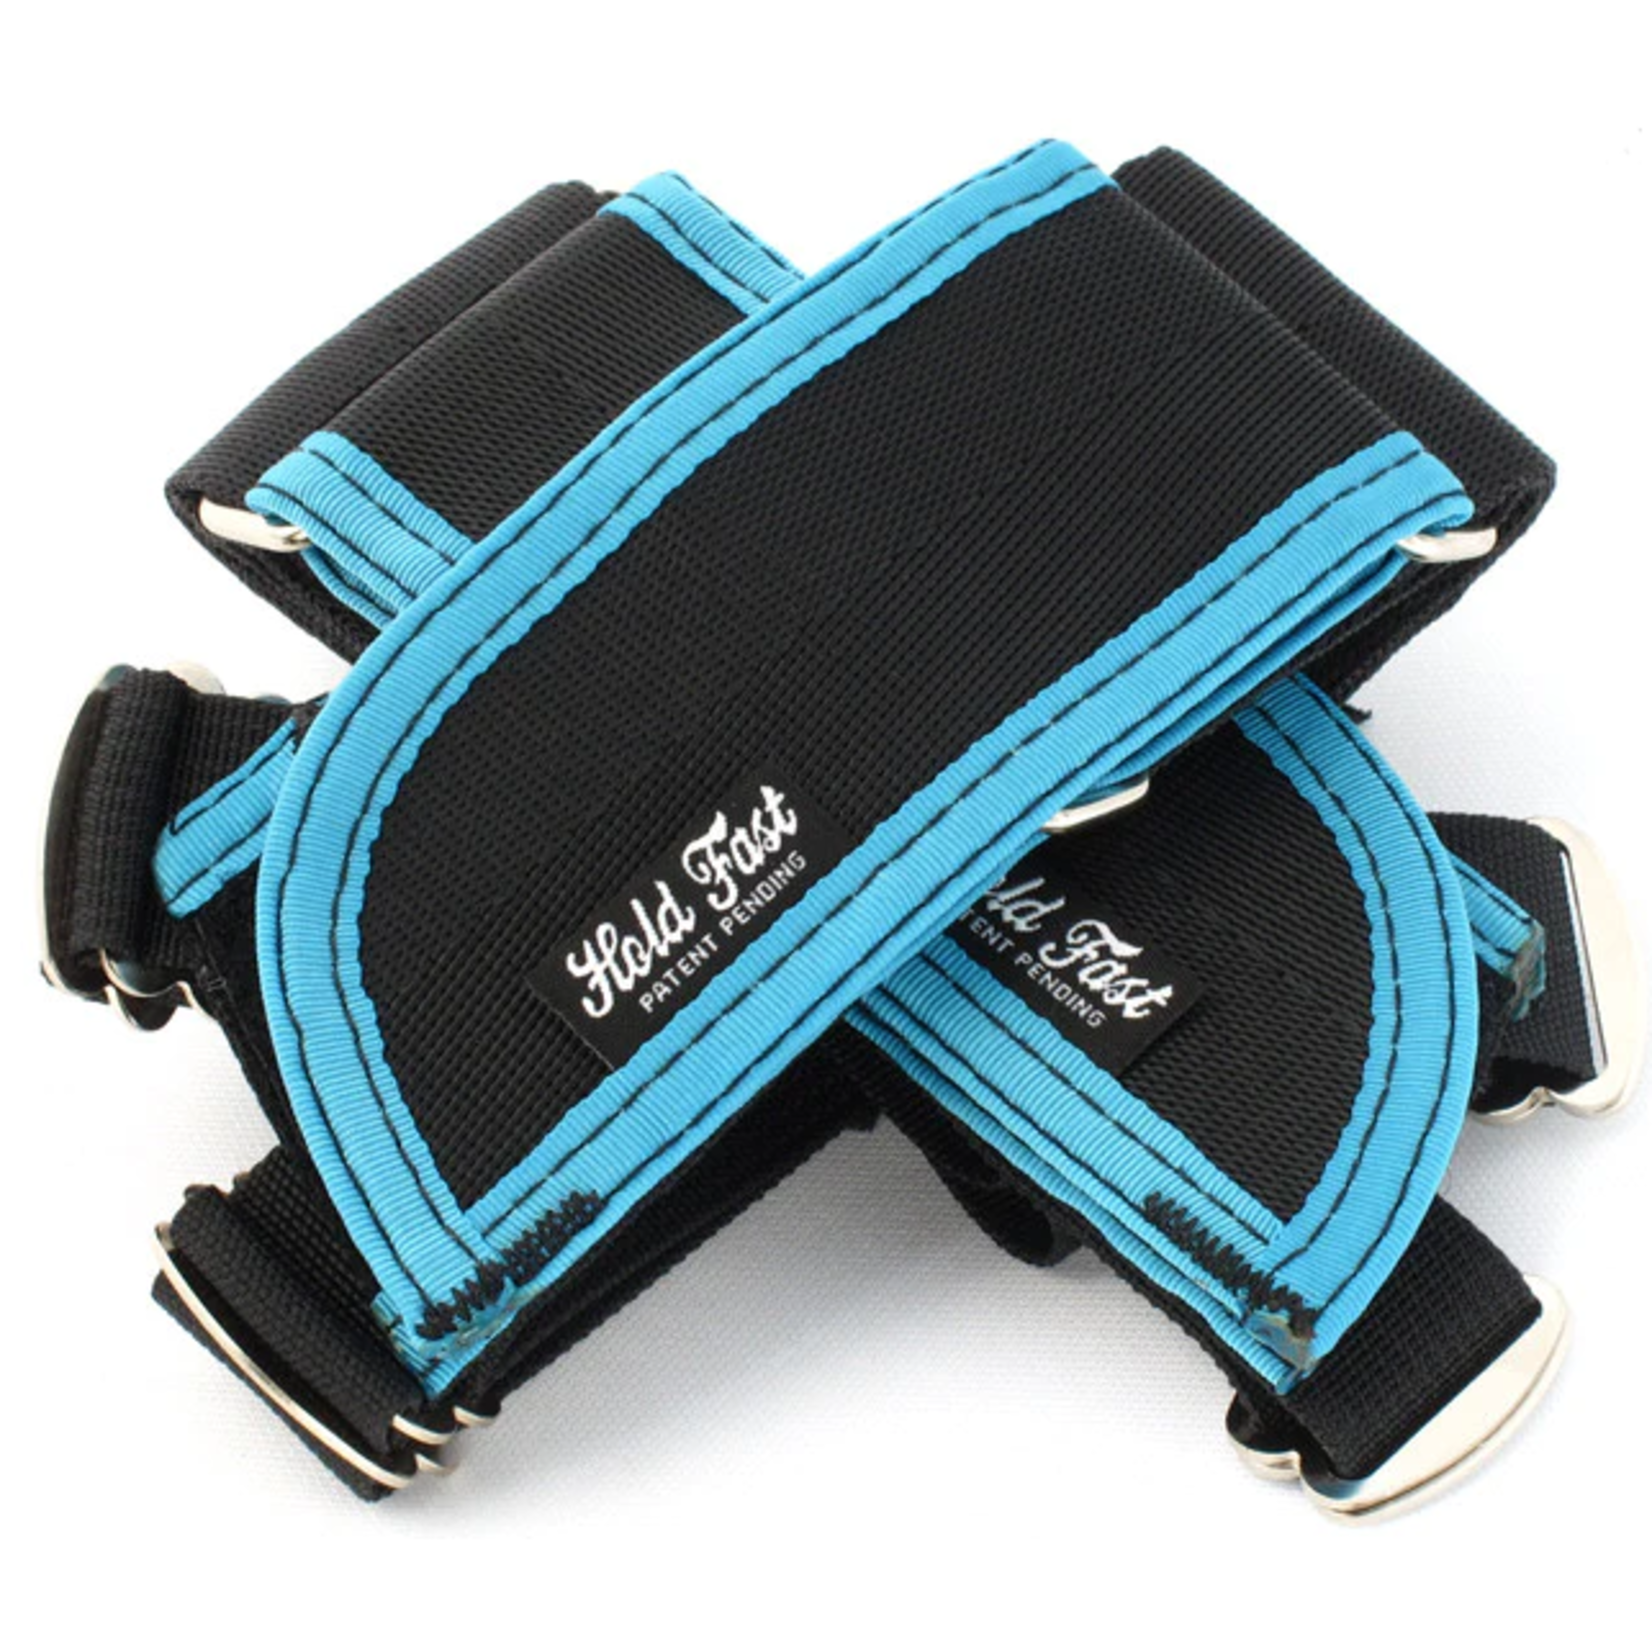 Hold Fast Hold Fast Original Bicycle Pedal Foot Retention Straps,